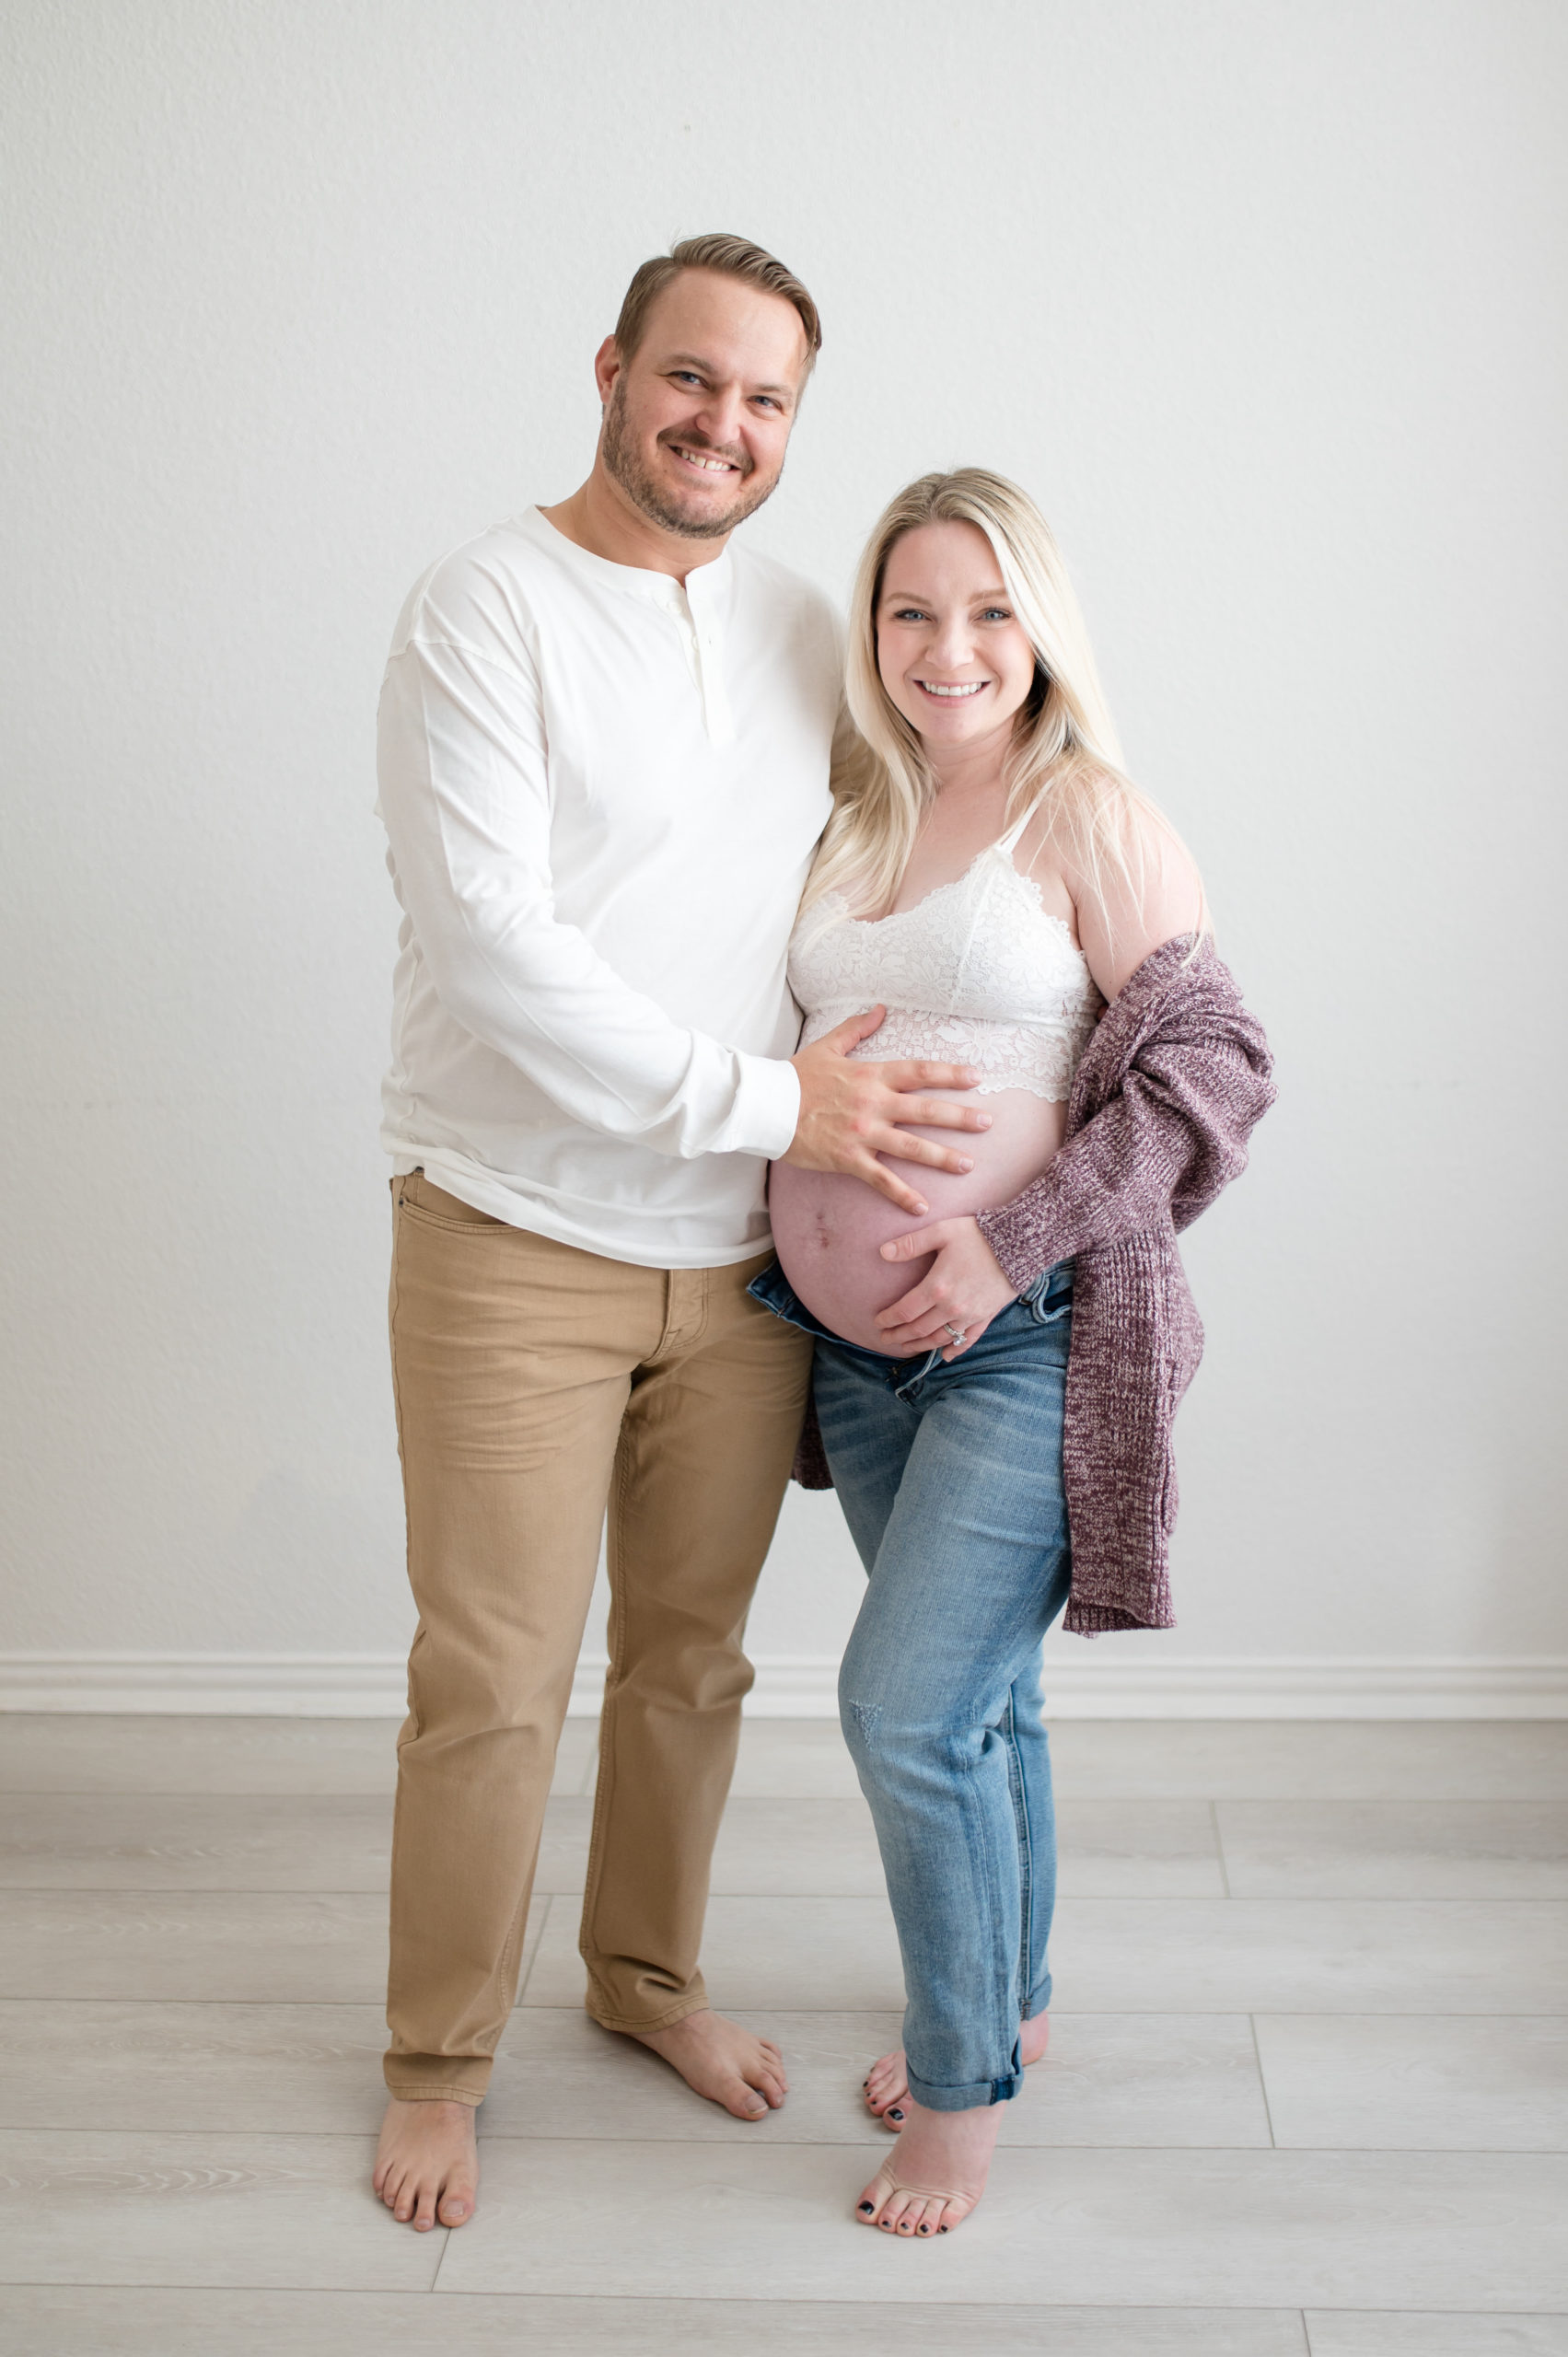 husband and wife smiling holding baby bump during an in studio maternity session in dallas texas photographed by Dallas newborn photographer, Lindsey Dutton Photography